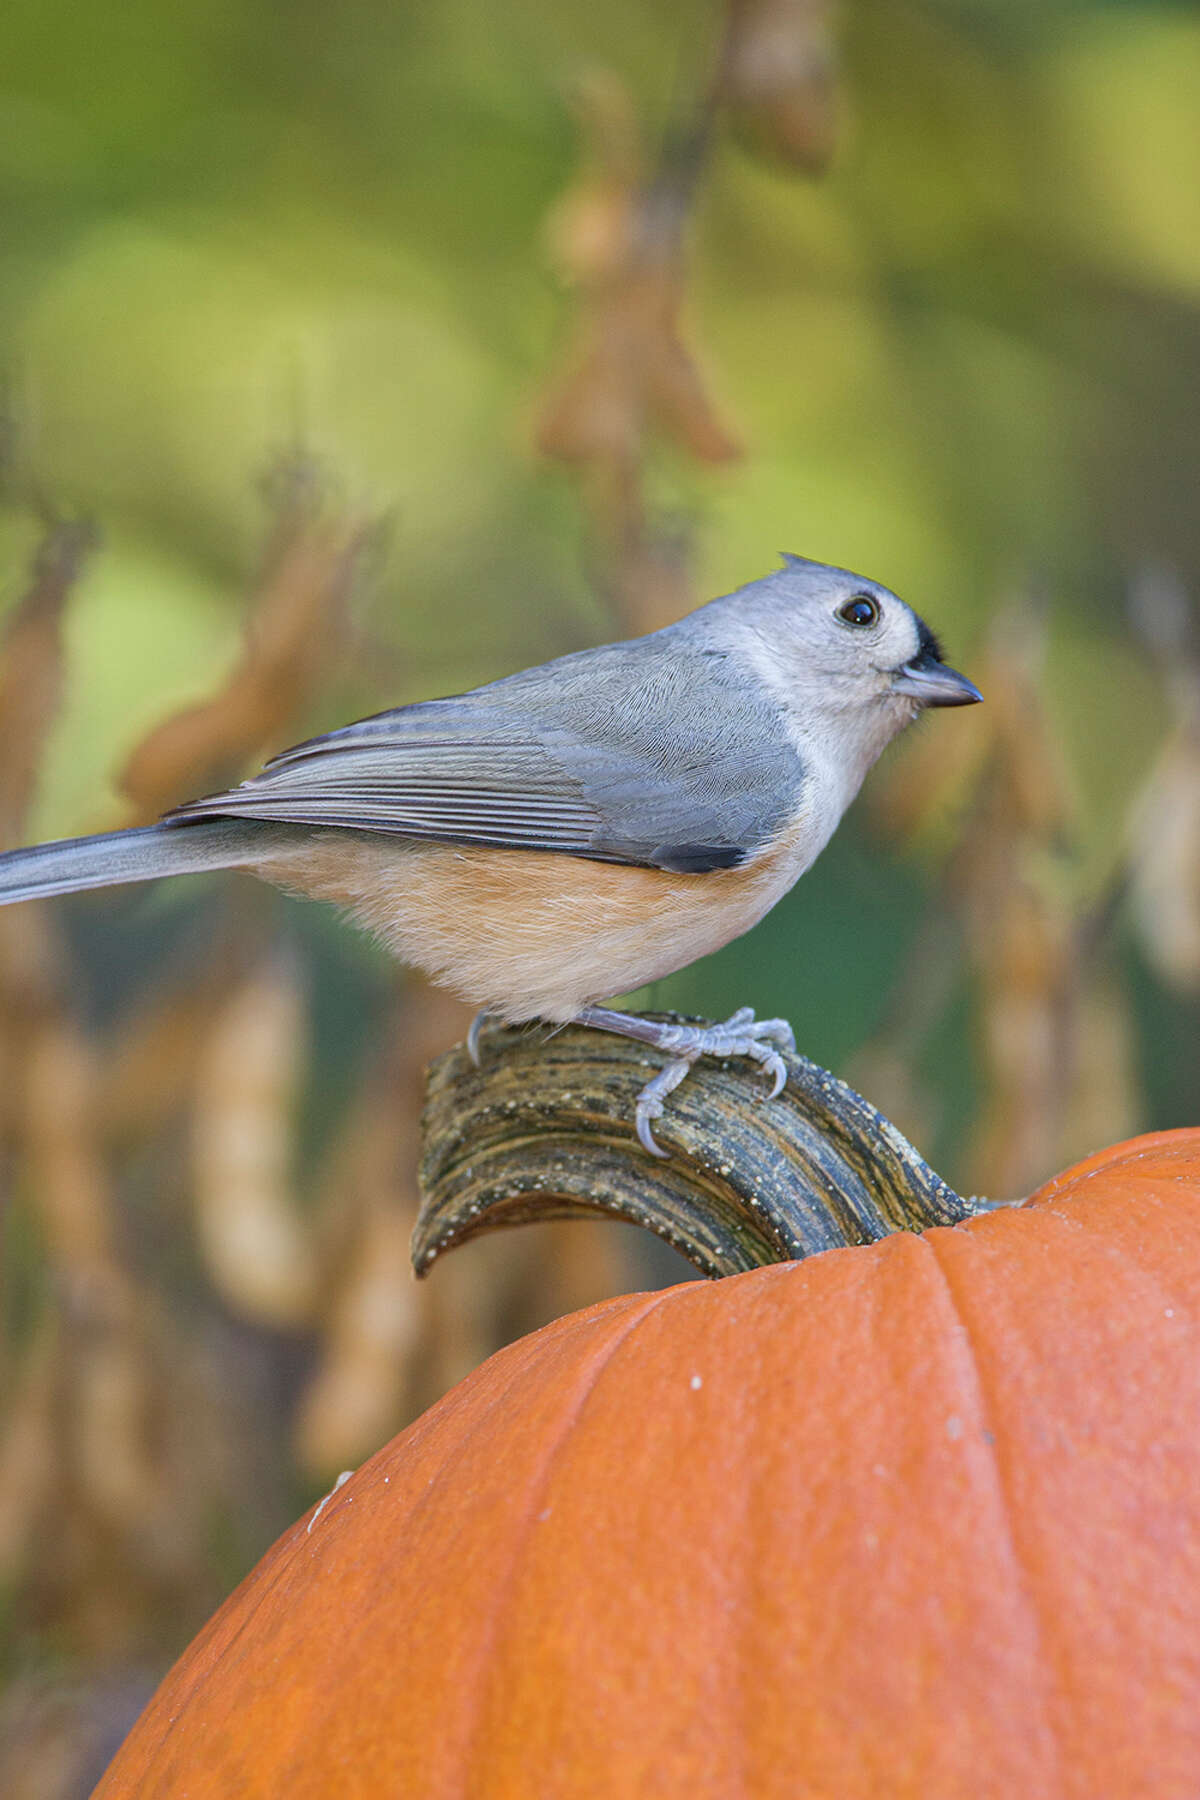 Tufted titmouse. Photo Credit: Kathy Adams Clark. Restricted use.